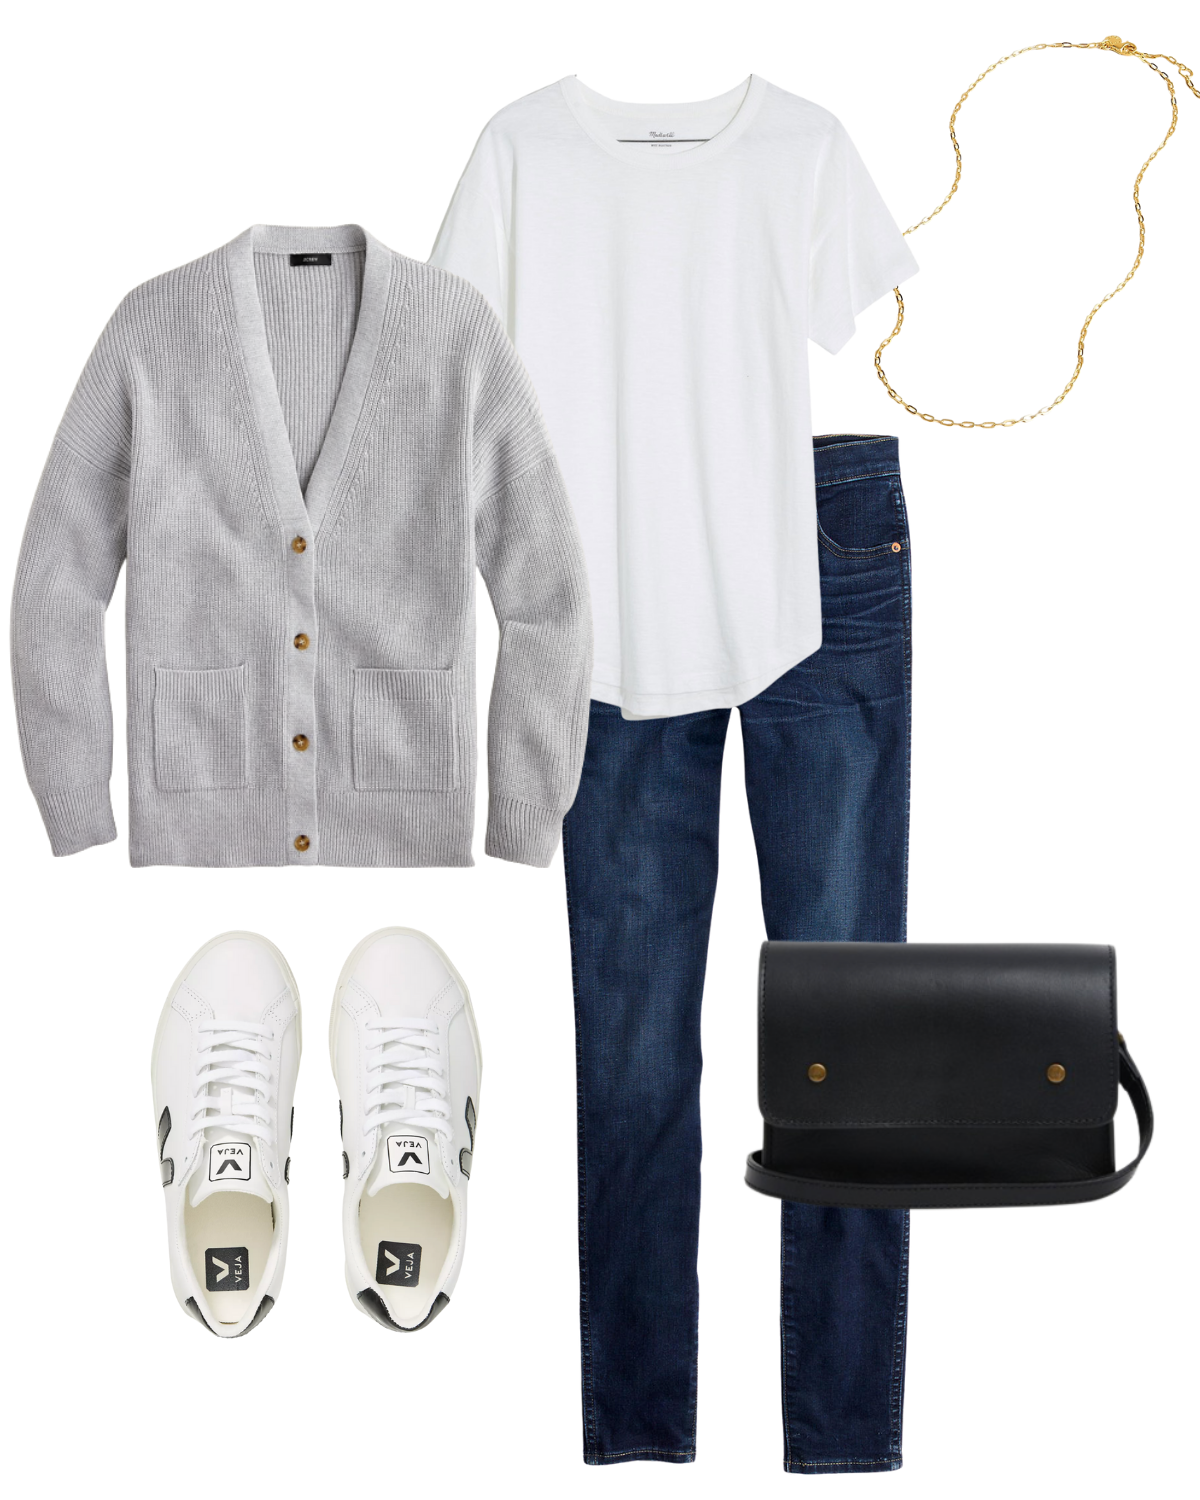 white tee Winter outfit idea